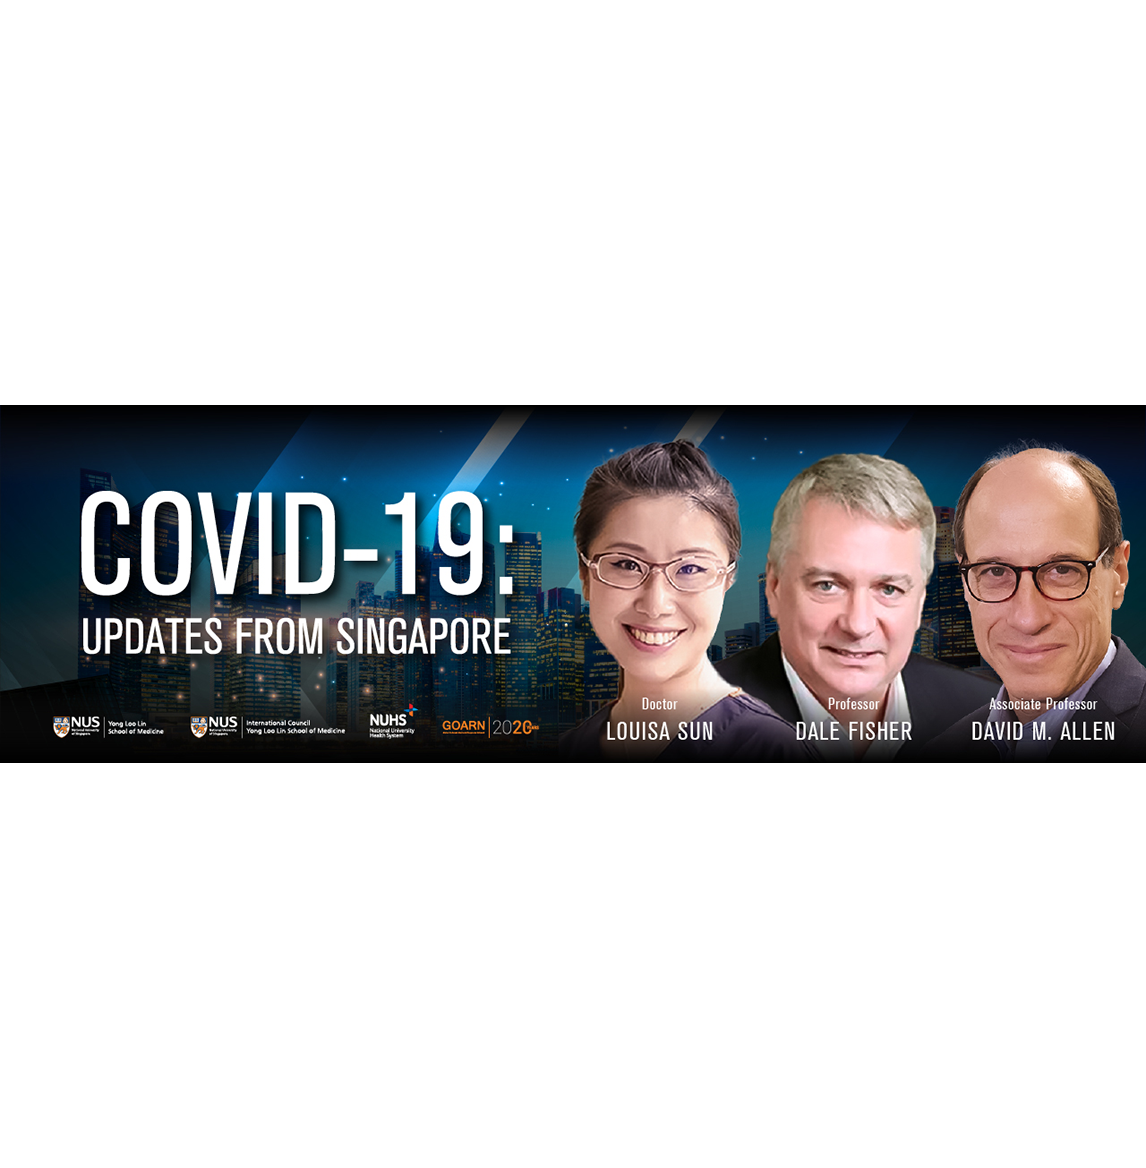 COVID-19 Updates from Singapore returns every fourth Thursday of the month